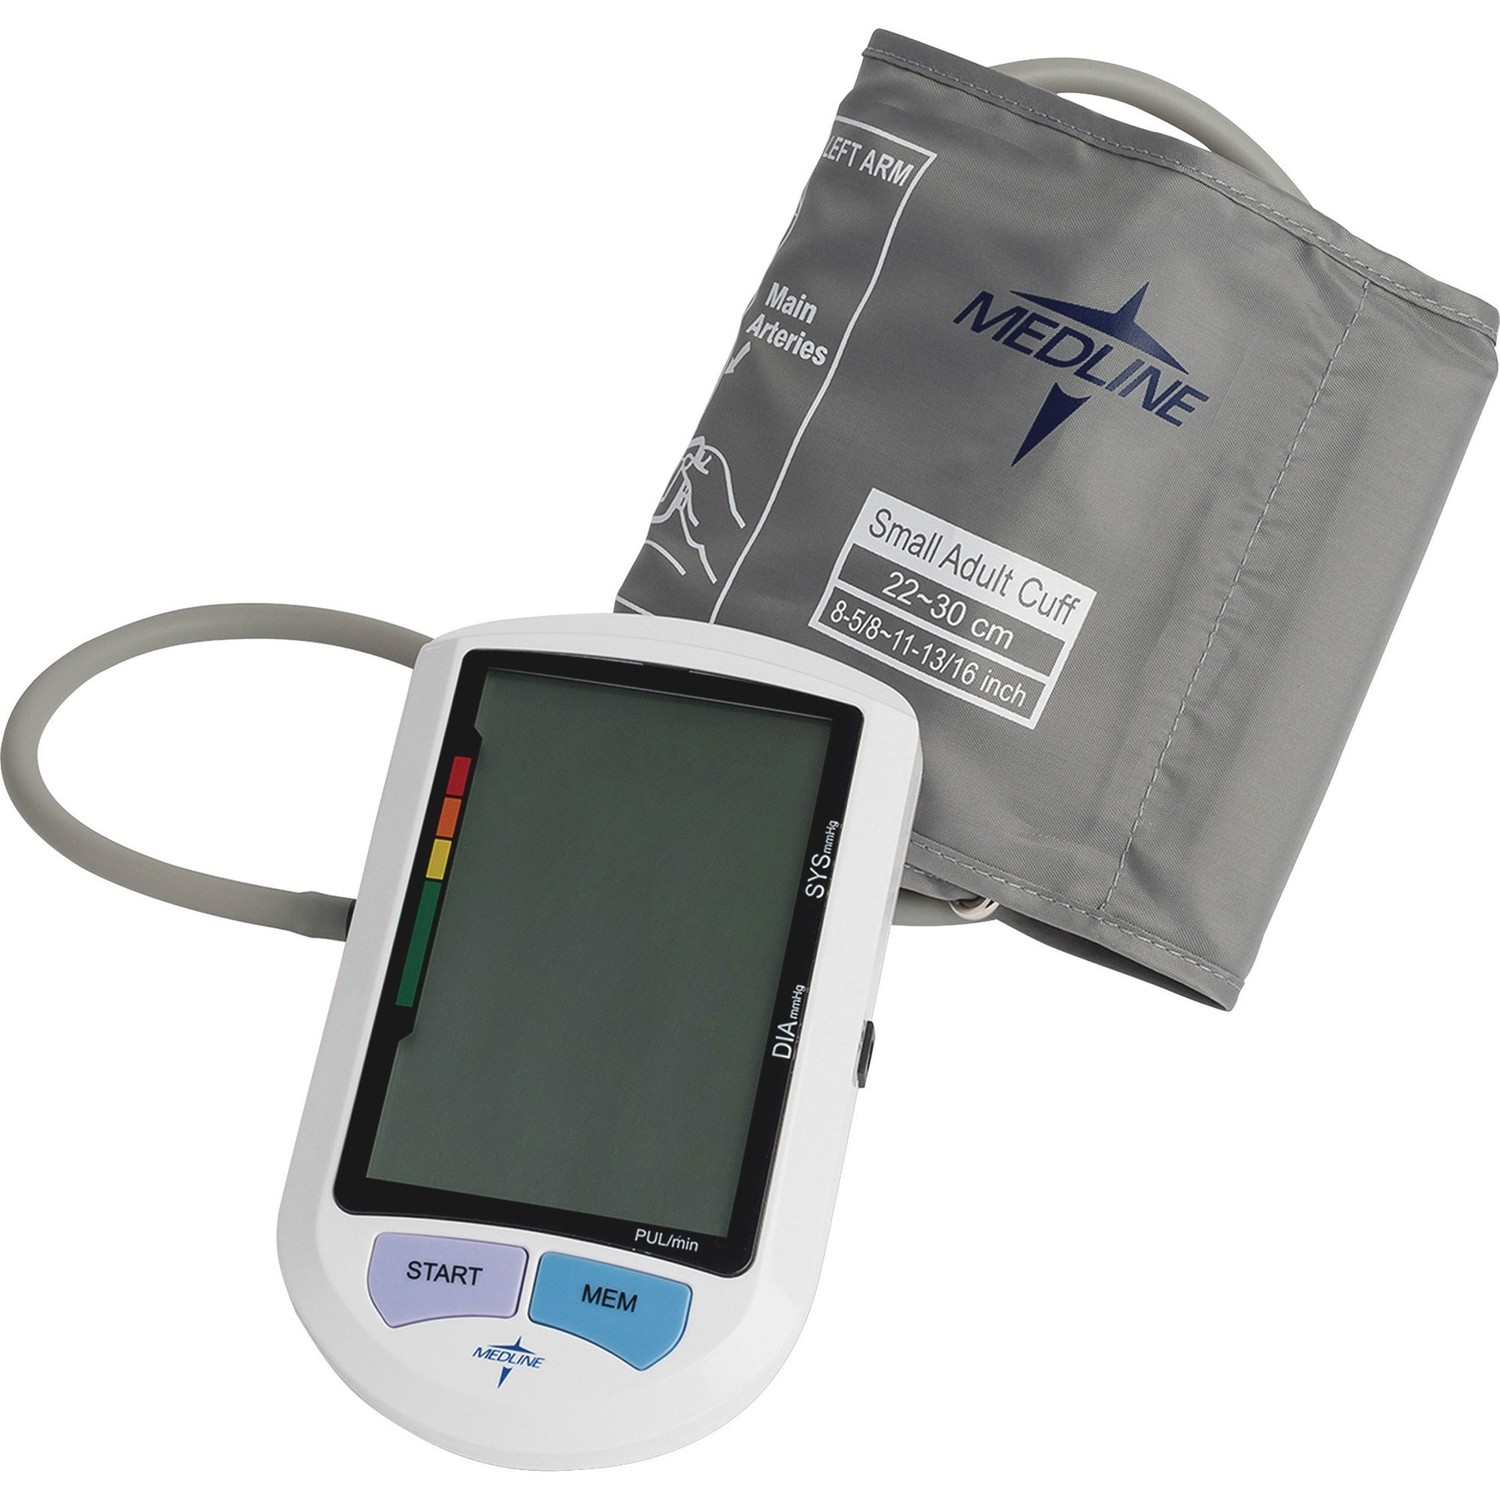 Automatic Digital Upper Arm Blood Pressure Monitor, Small Adult Size